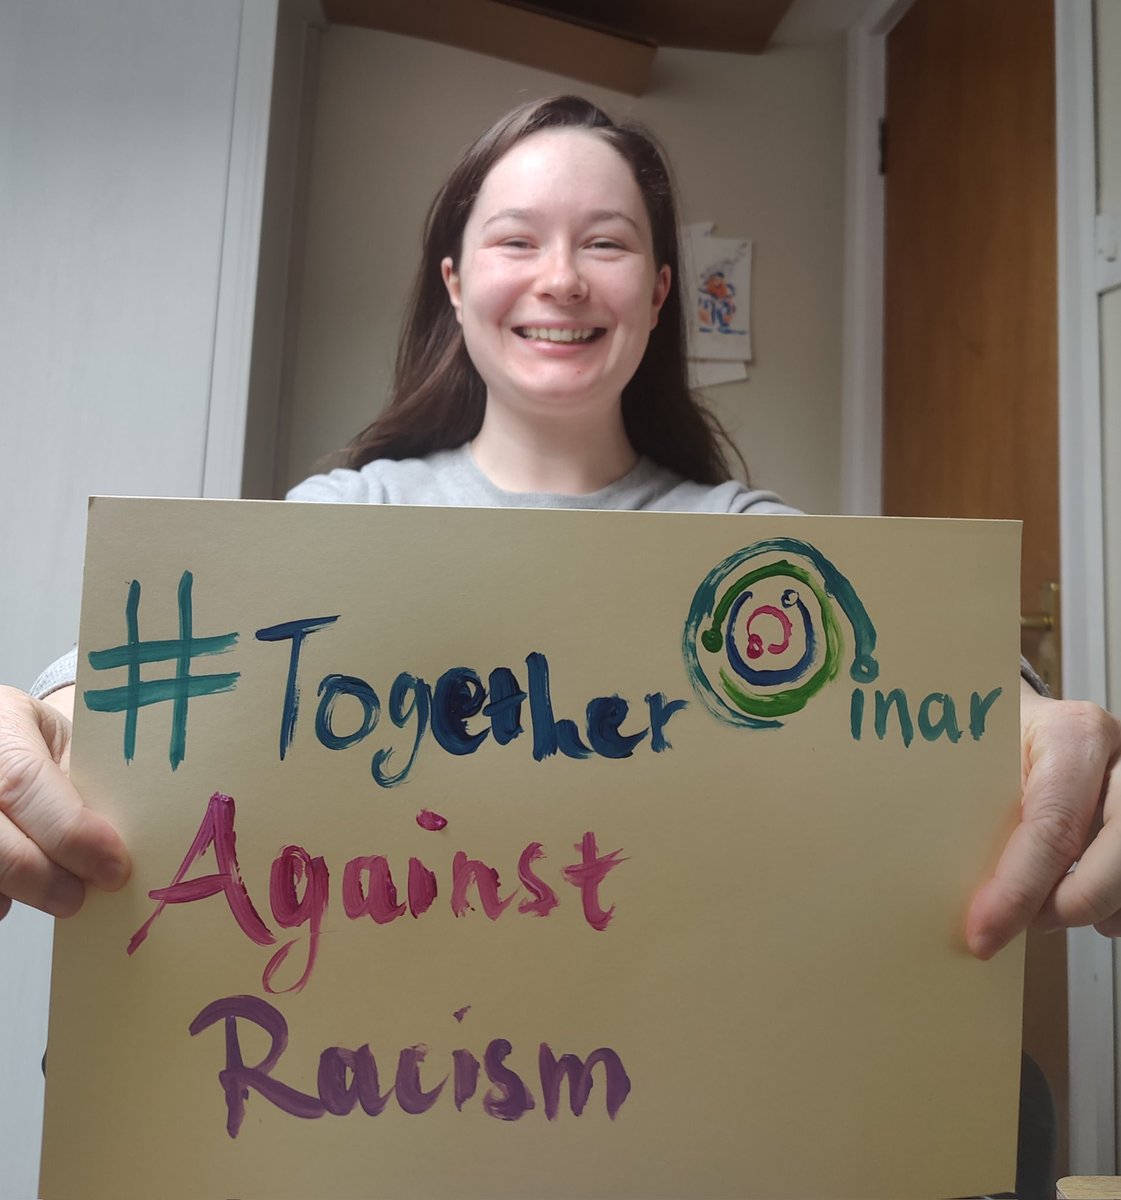 Thank you @INARIreland for all that you do working for a more equal and inclusive Ireland. I am so lucky to work with you and learn from you on the Equality Fund @Rethink_Ireland. #Togetheragainstracism